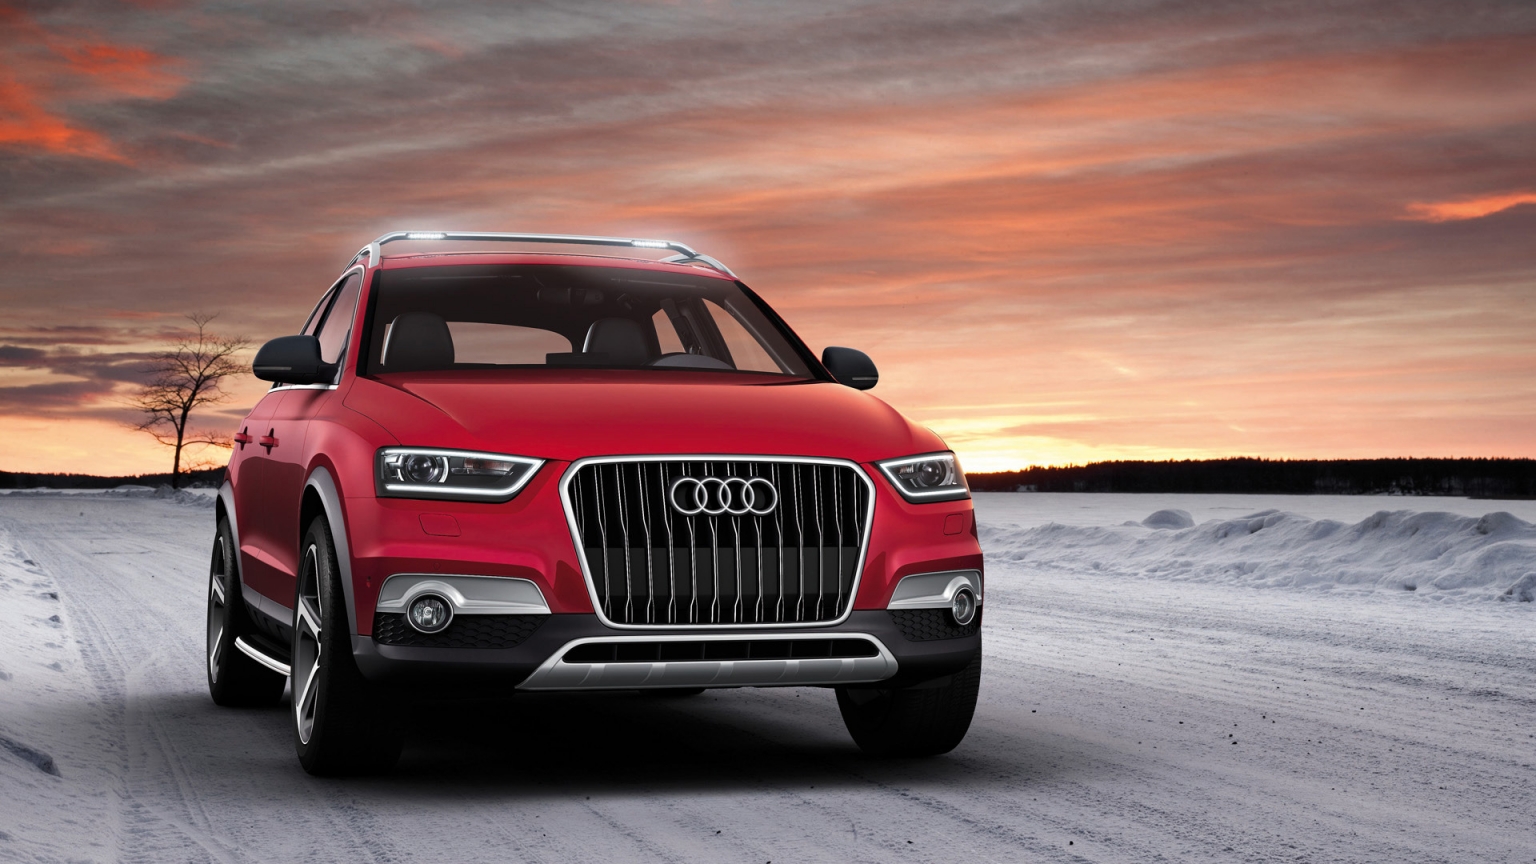 2012 Audi Q3 Vail Front for 1536 x 864 HDTV resolution